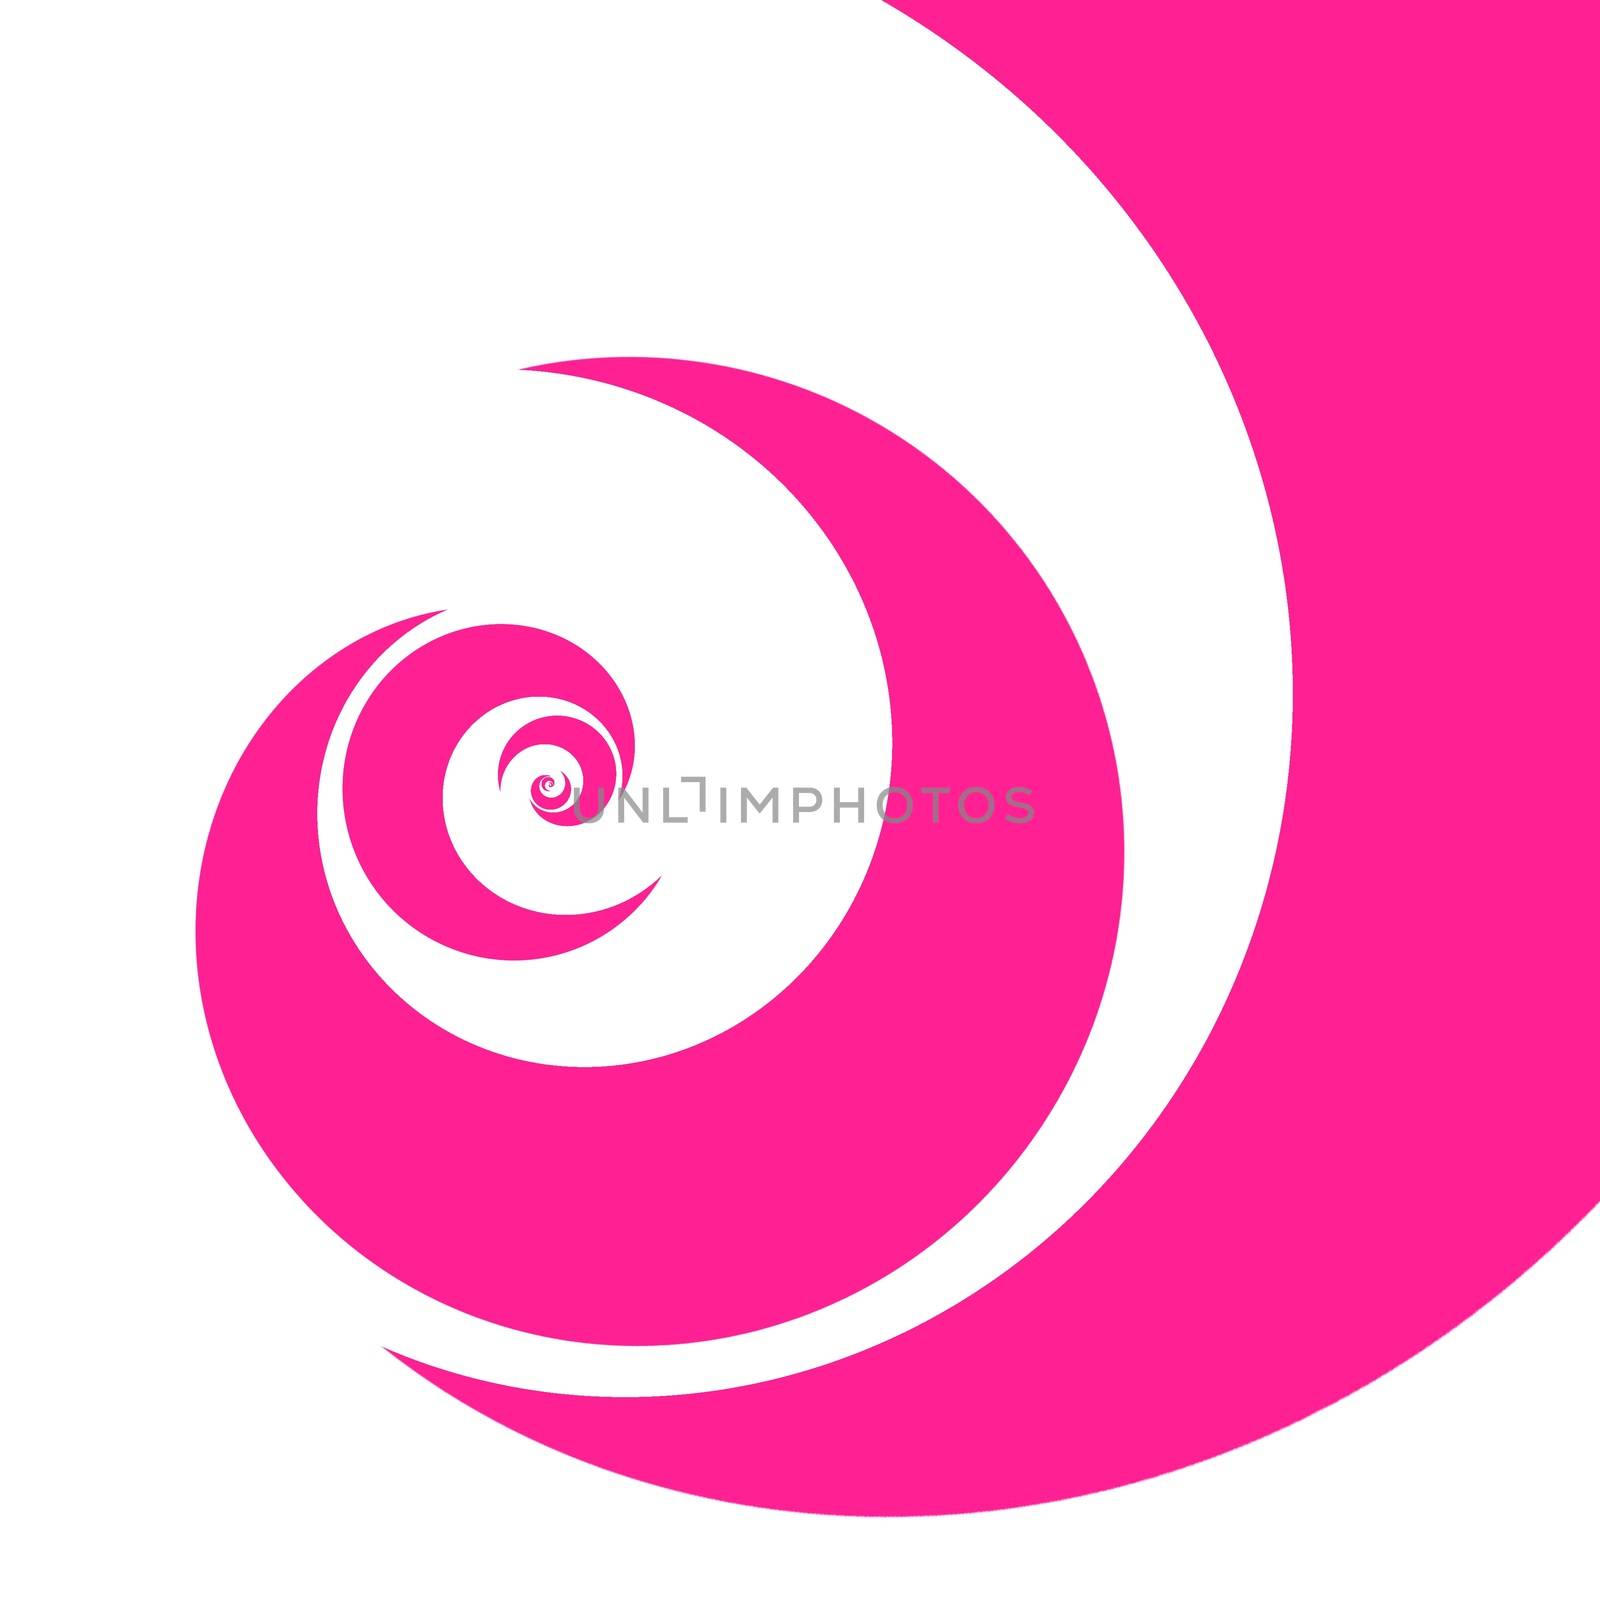 abstract image of spiral form of monocentric type